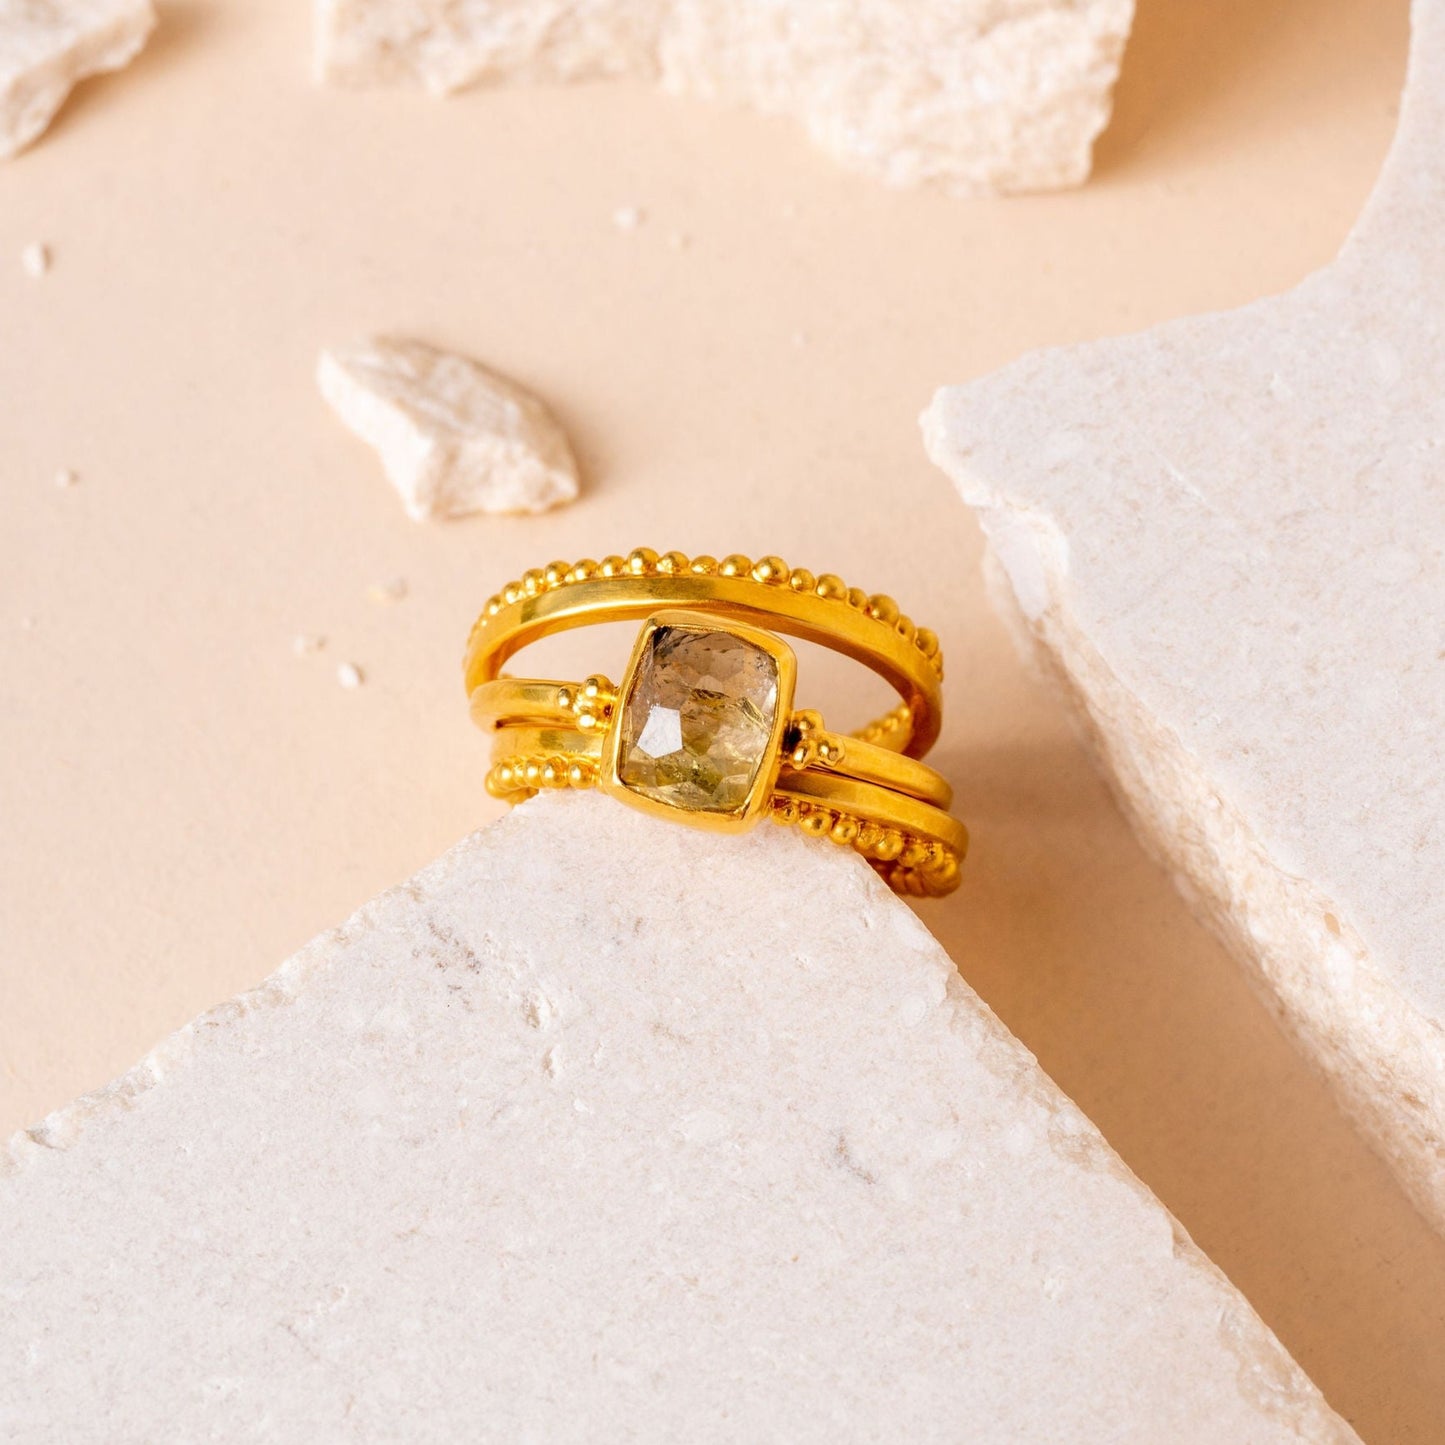 Close-up view of a luxurious gold rings adorned with delicate granulation details, surrounding a mesmerizing hand-cut olive-colored gemstone.